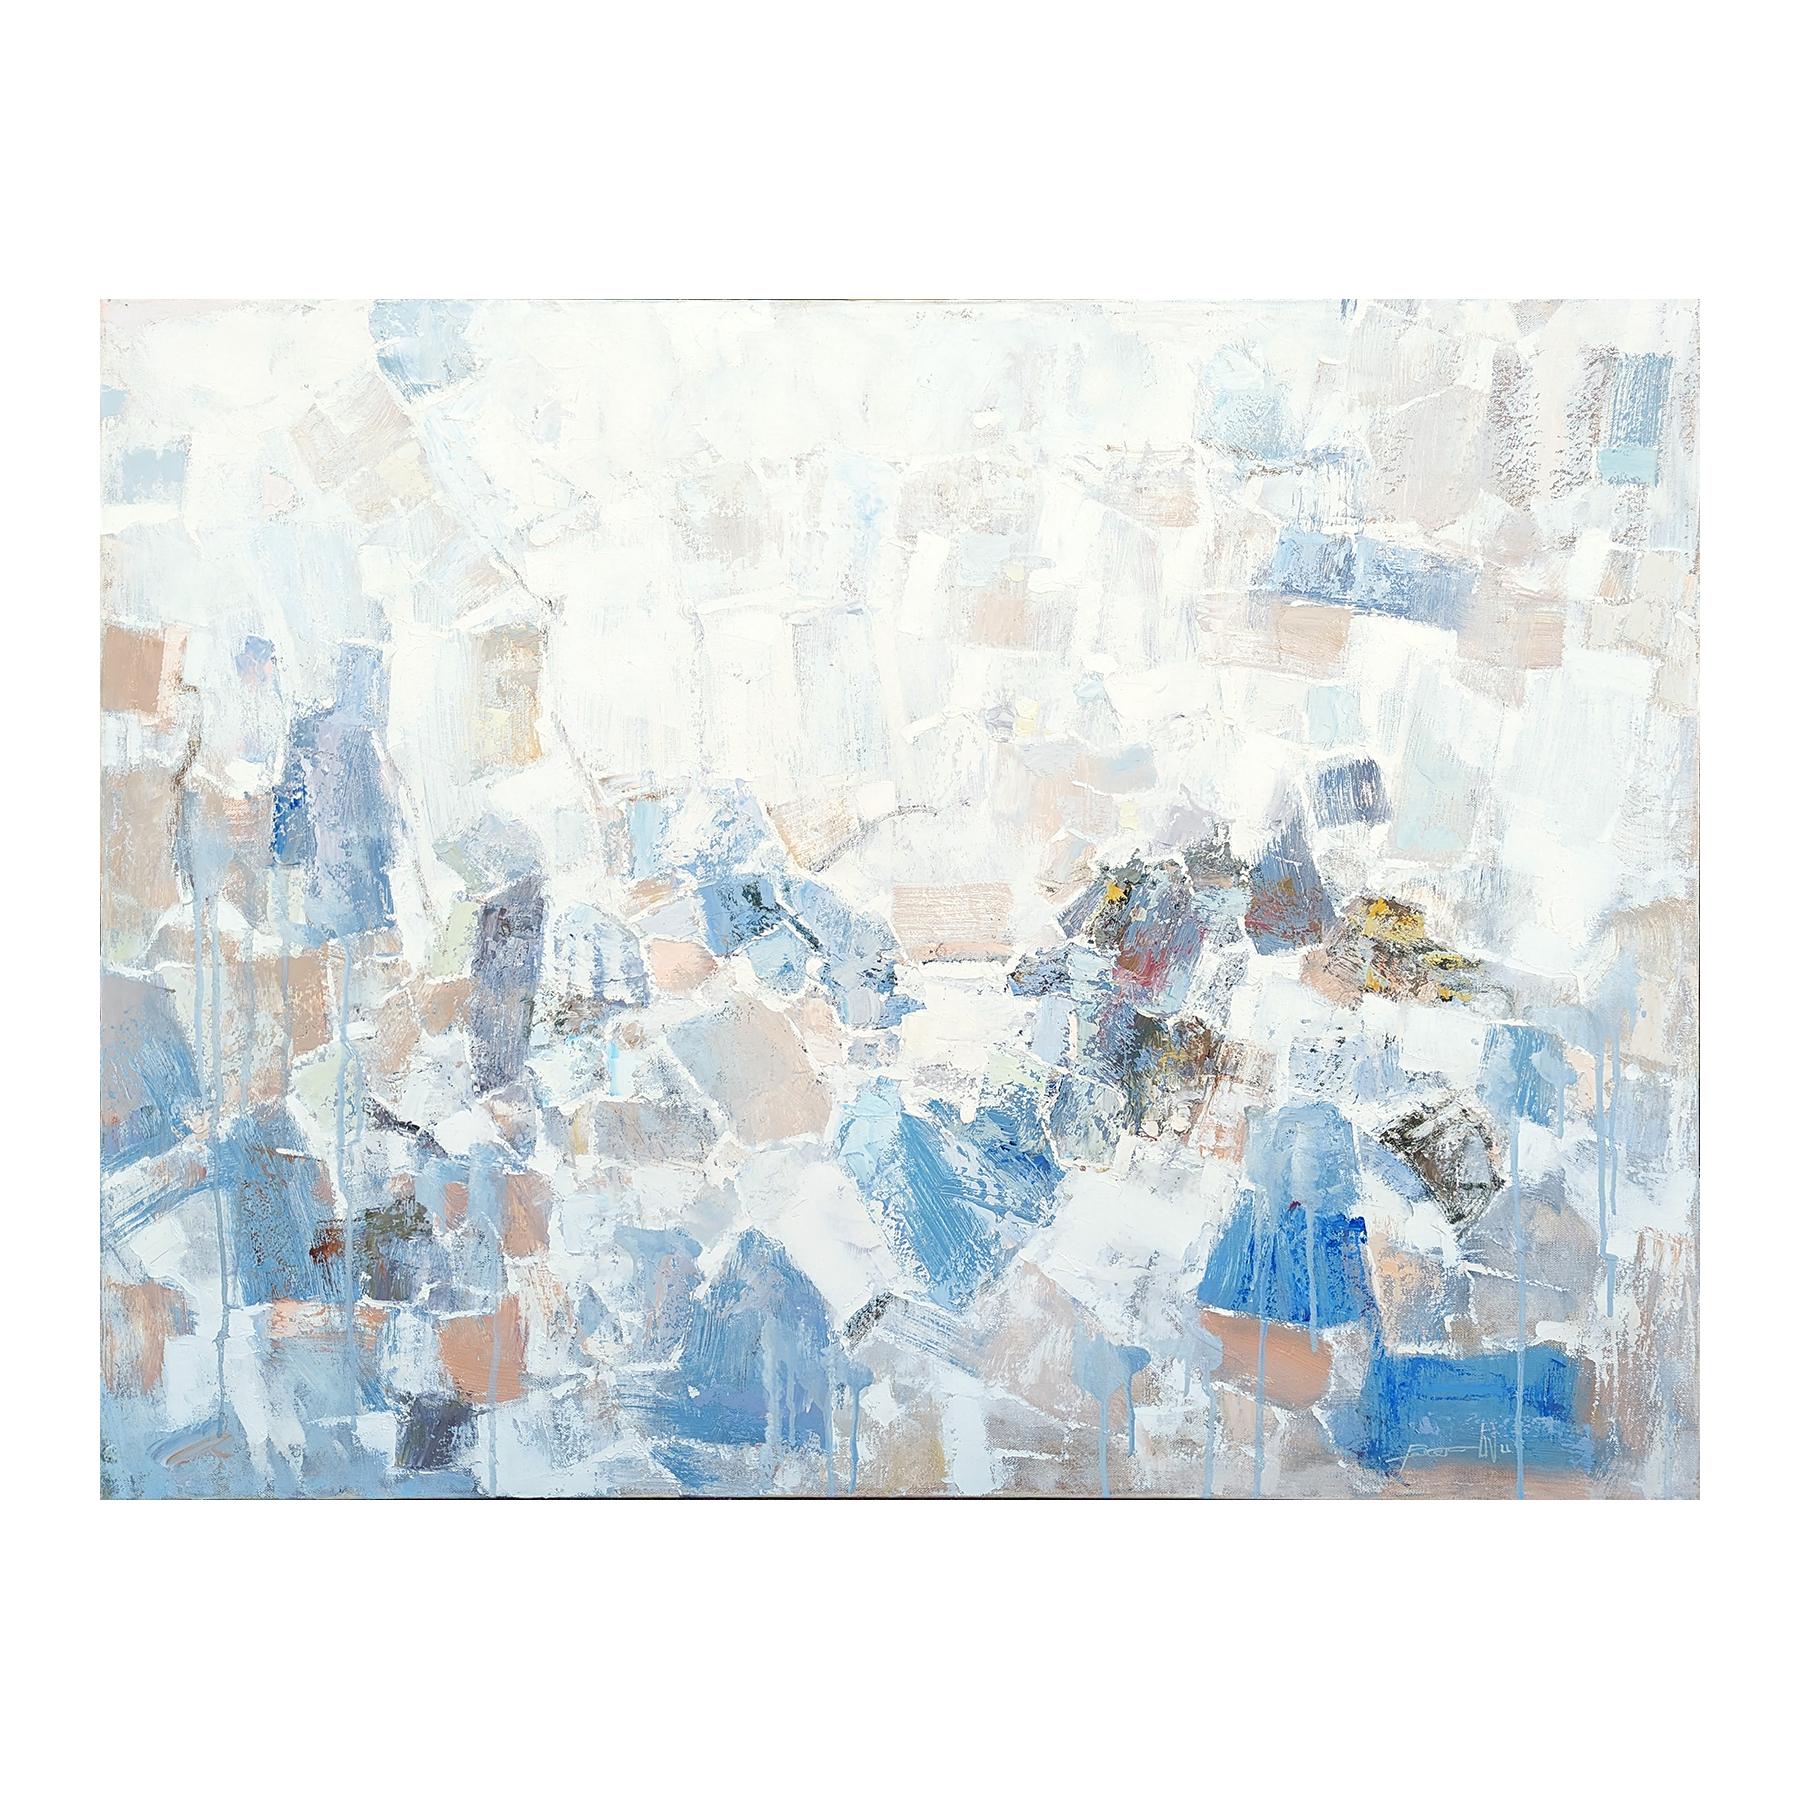 Pastel toned abstract painting by Texas-based artist Peter Wu. The work features light blue and peach toned gestural strokes against a white background. Signed in the front lower right corner as well as titled, signed, and dated by artist on the